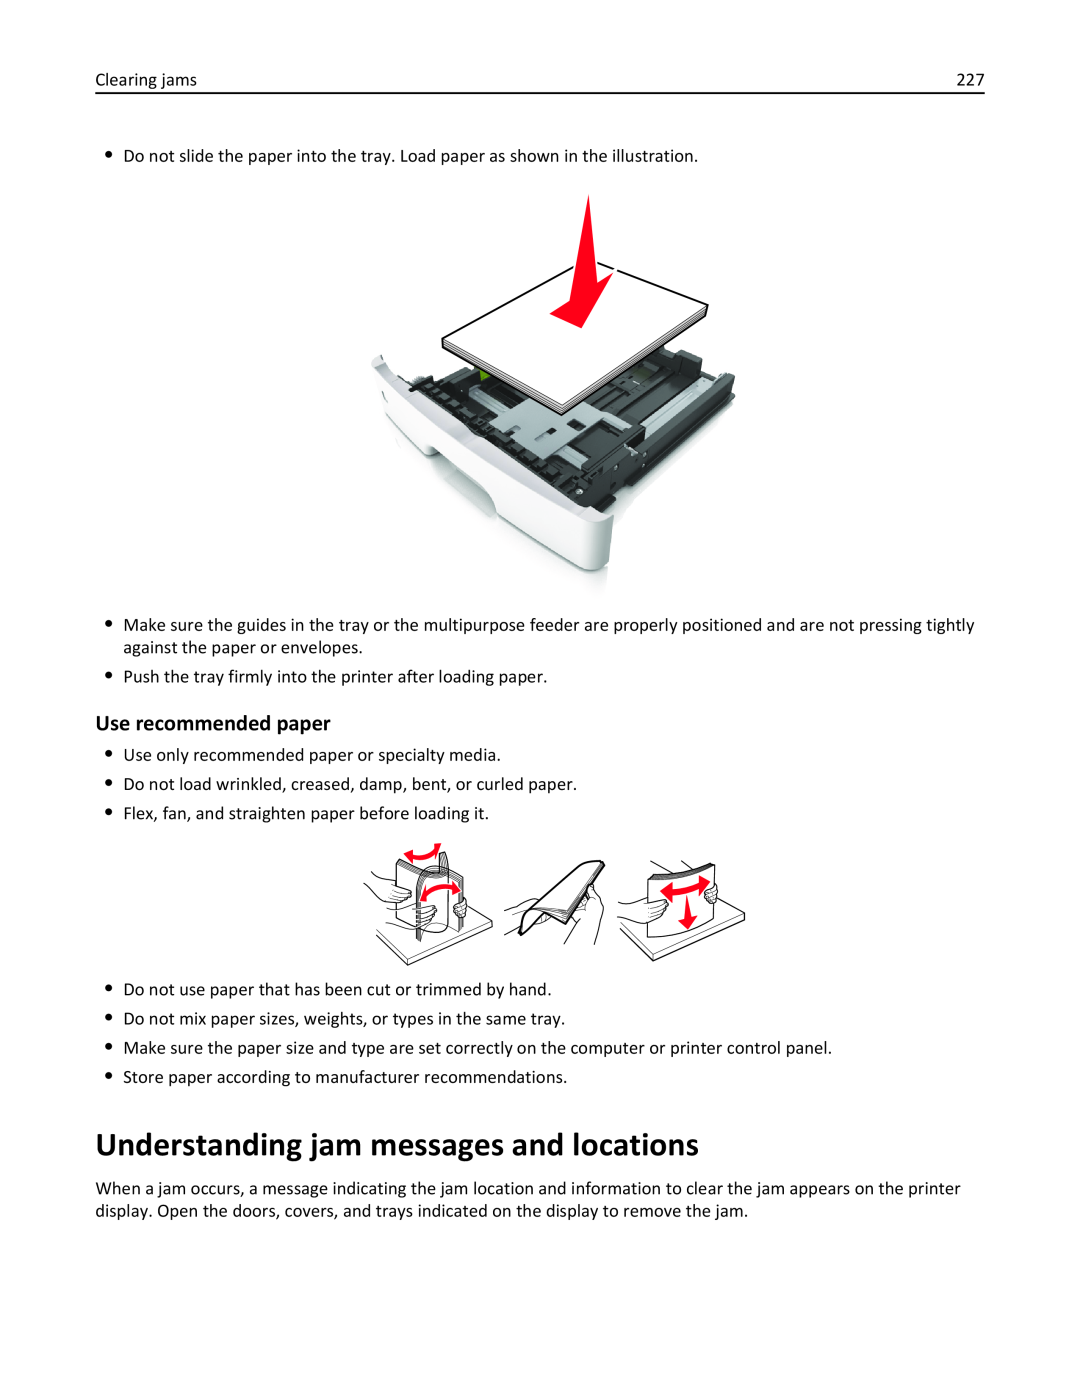 Lexmark 675, 470, 35S5701, 670, MX510, MX410DE manual Understanding jam messages and locations, Use recommended paper 